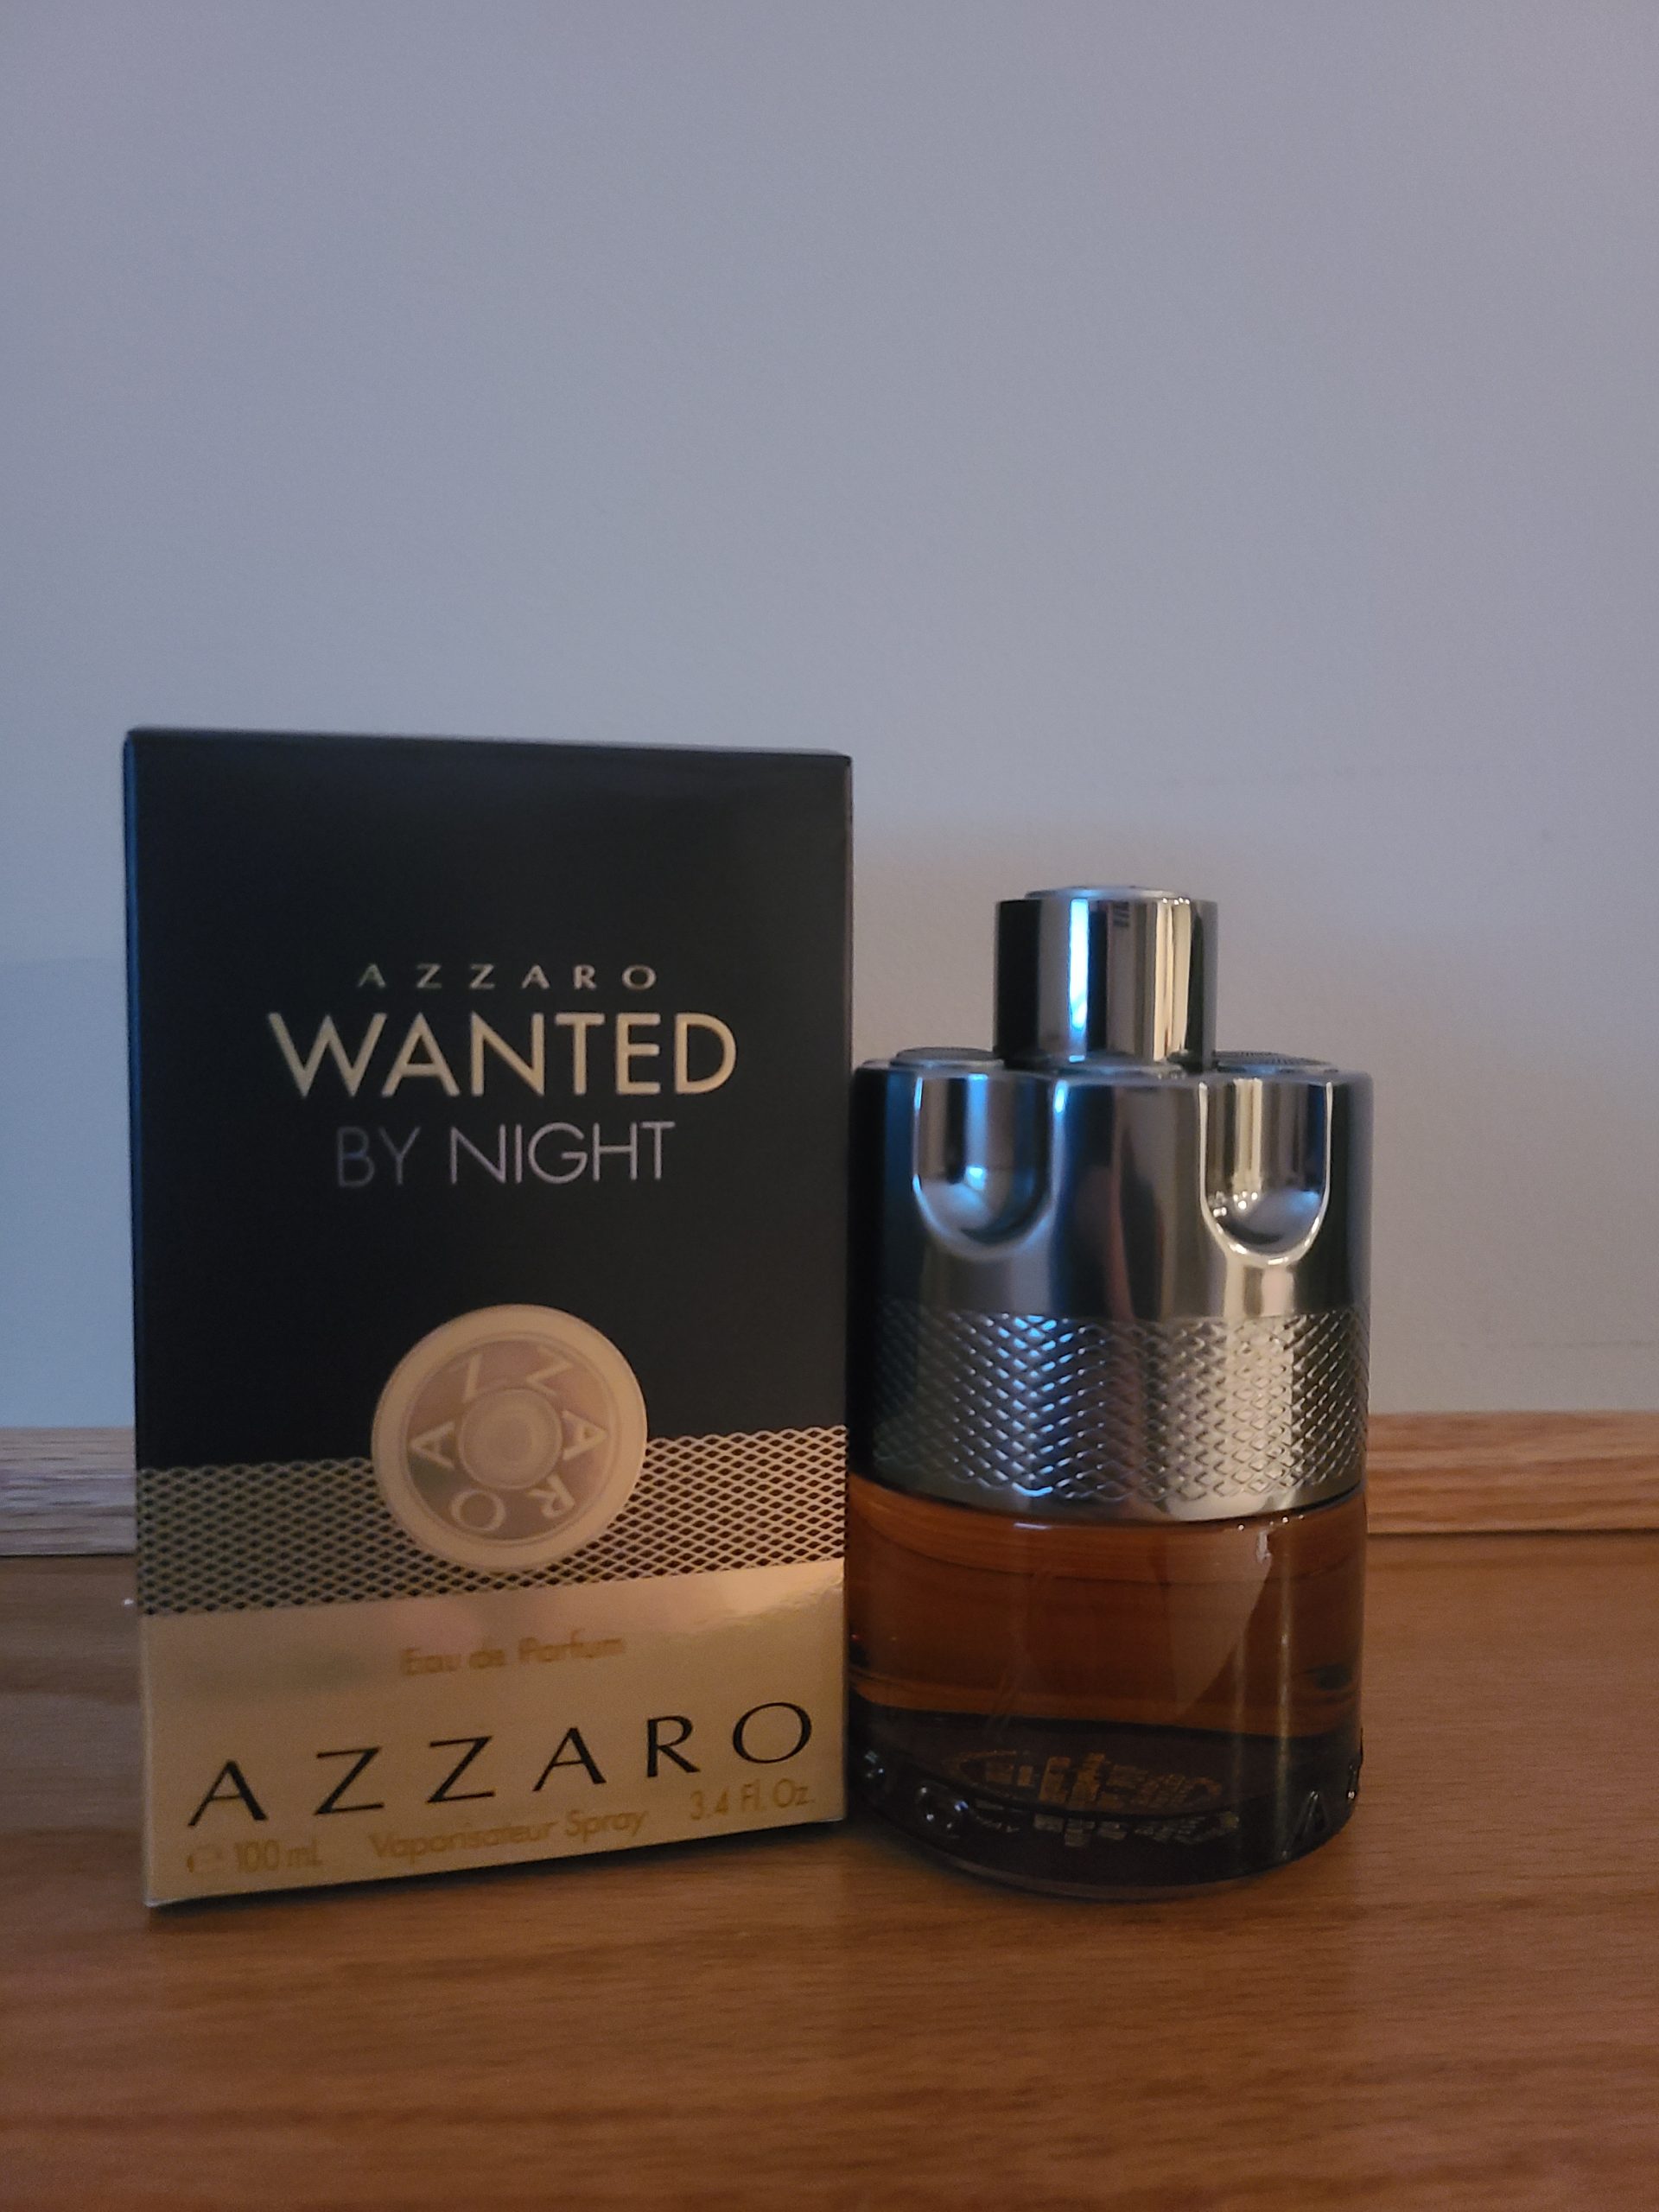 Azzaro Wanted By Night Review, box and bottle.